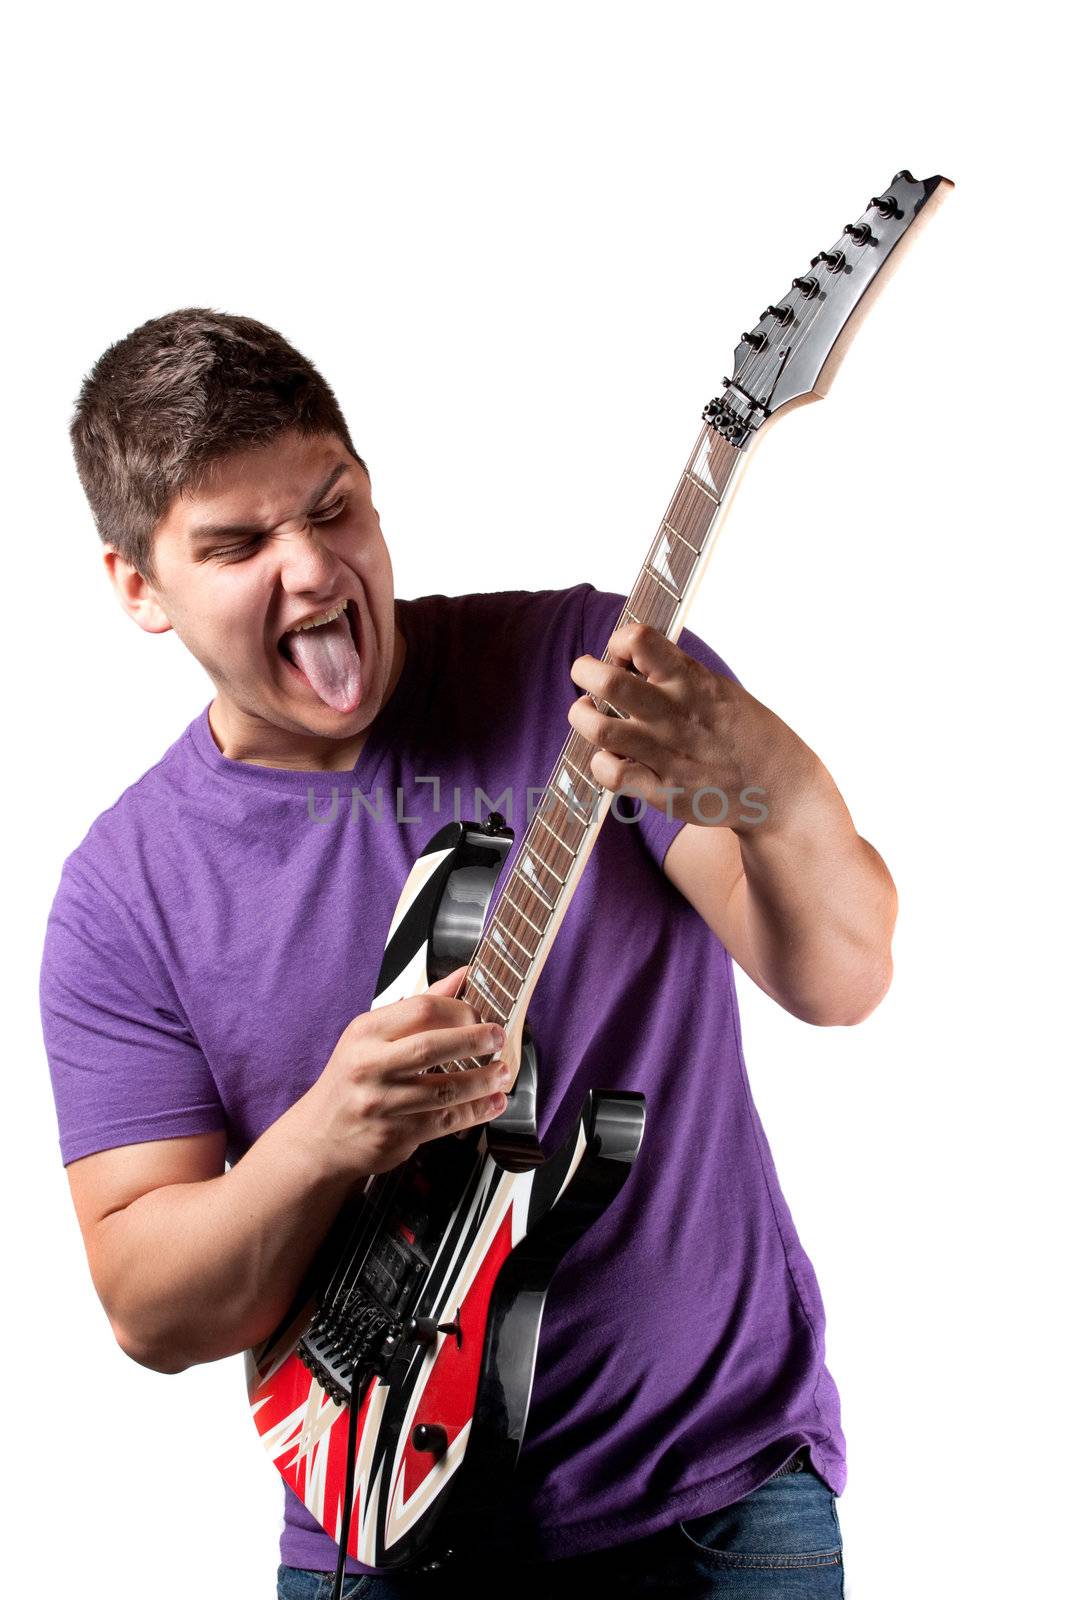 A man in his late teens rocks out while playing his electric guitar.